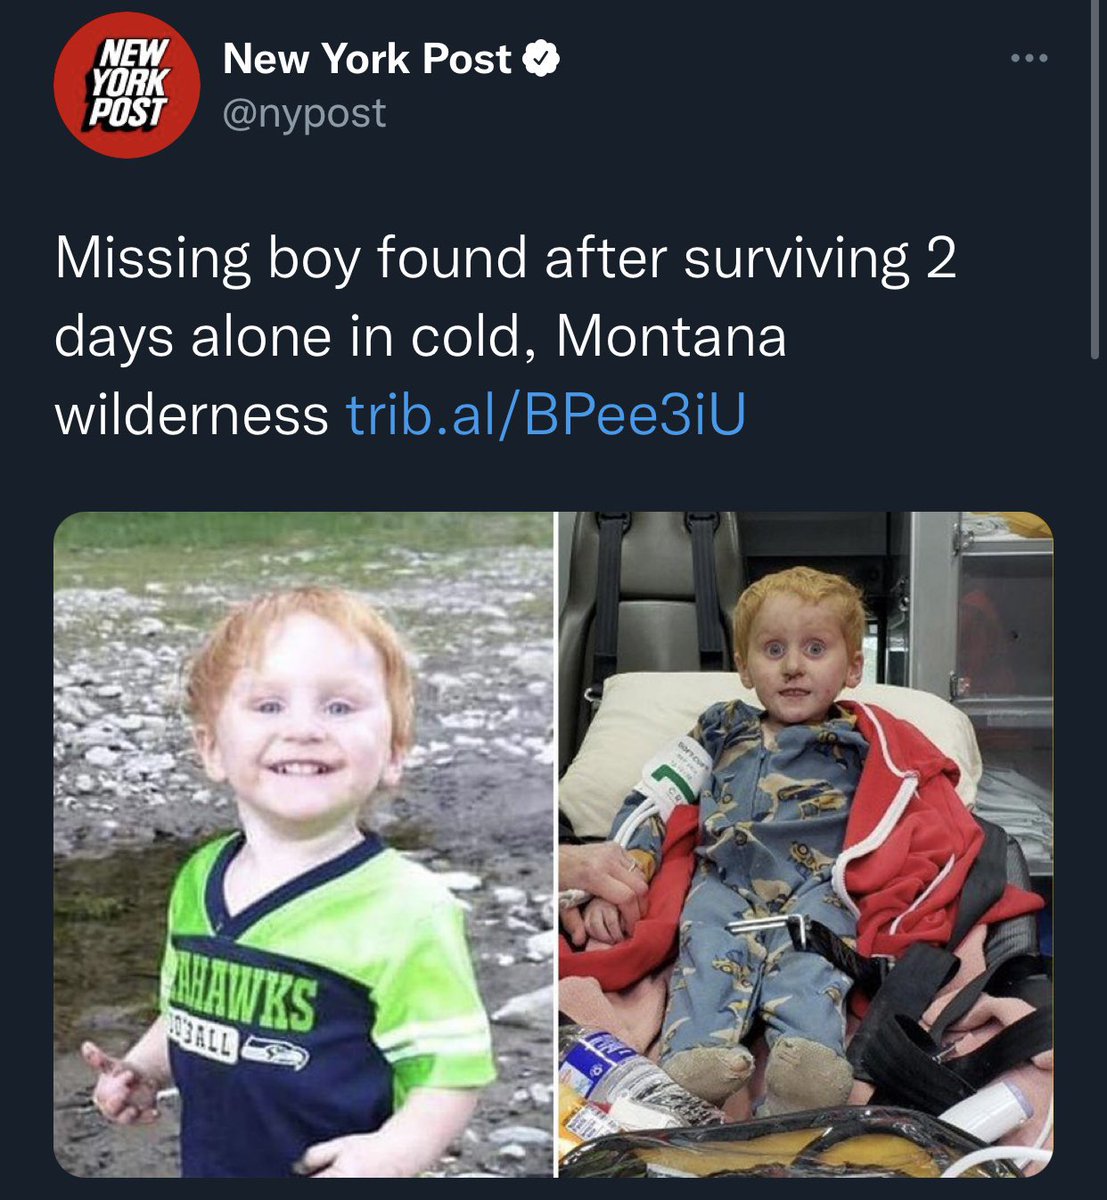 Dudes posting their wins - Child - ... New New York Post York Post Missing boy found after surviving 2 days alone in cold, Montana wilderness trib.alBPee3iU Ahawks 103 All Softc Hep cus